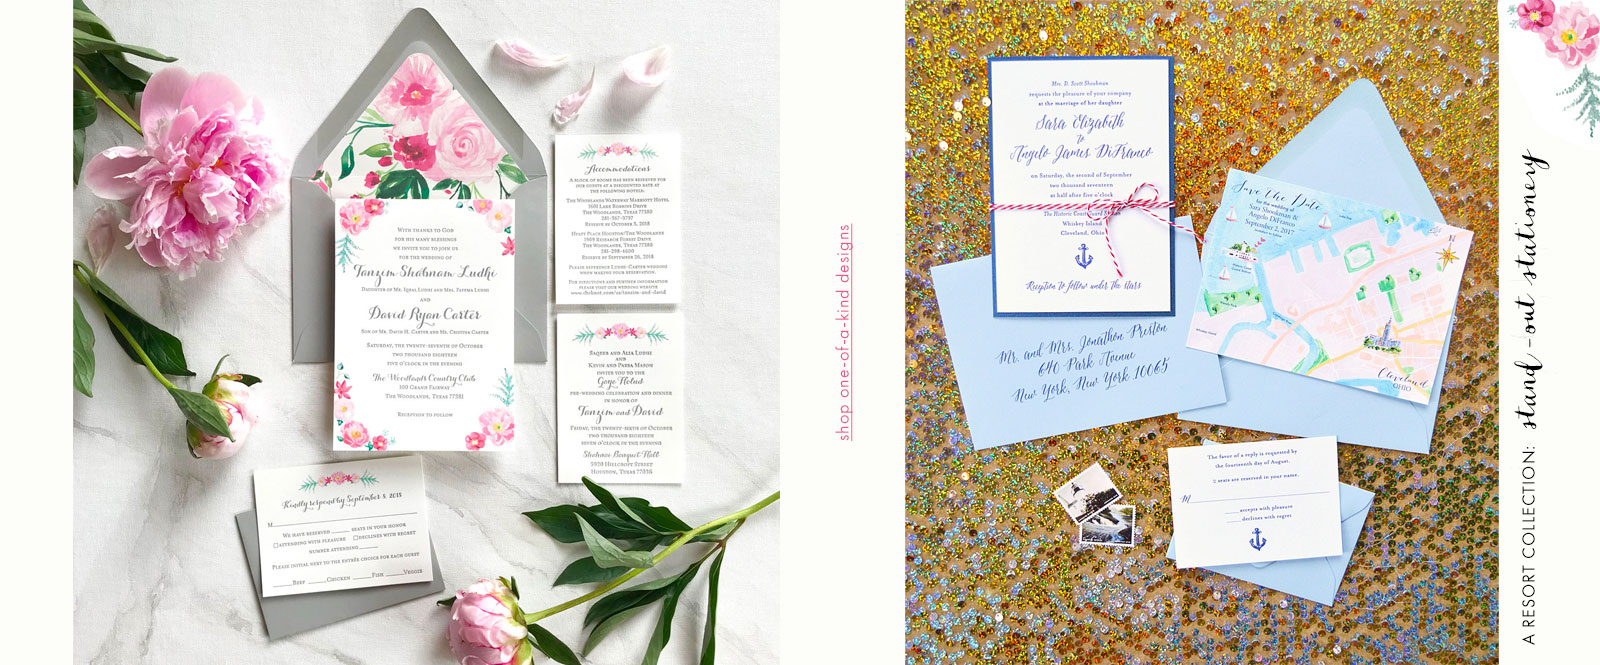 Custom wedding invitations with hand-painted watercolor designs by artist Michelle Mospens. Mospens Studio